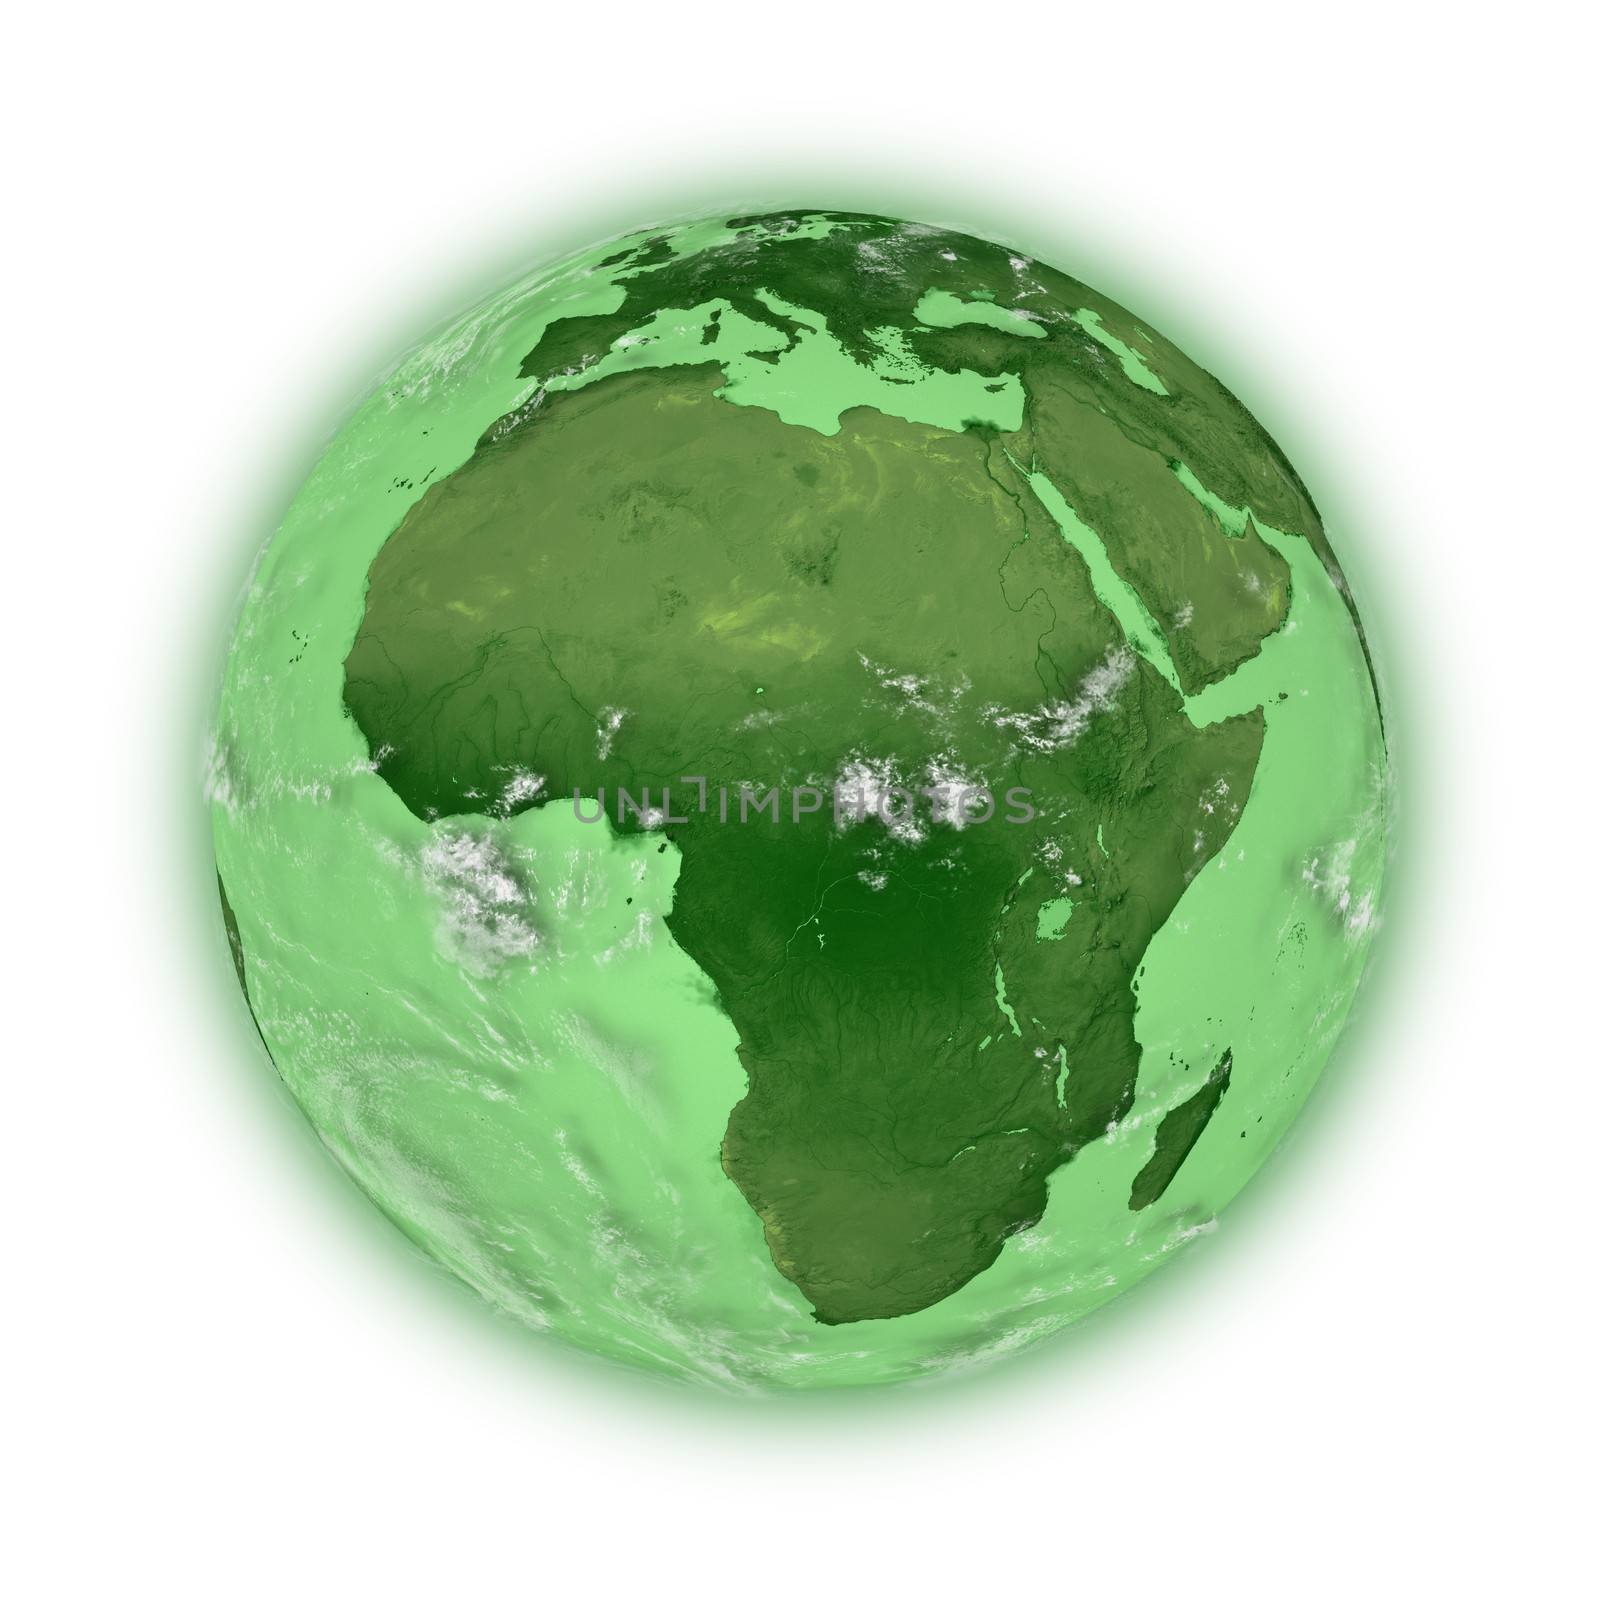 Africa on green planet Earth isolated on white background. Highly detailed planet surface. Elements of this image furnished by NASA.